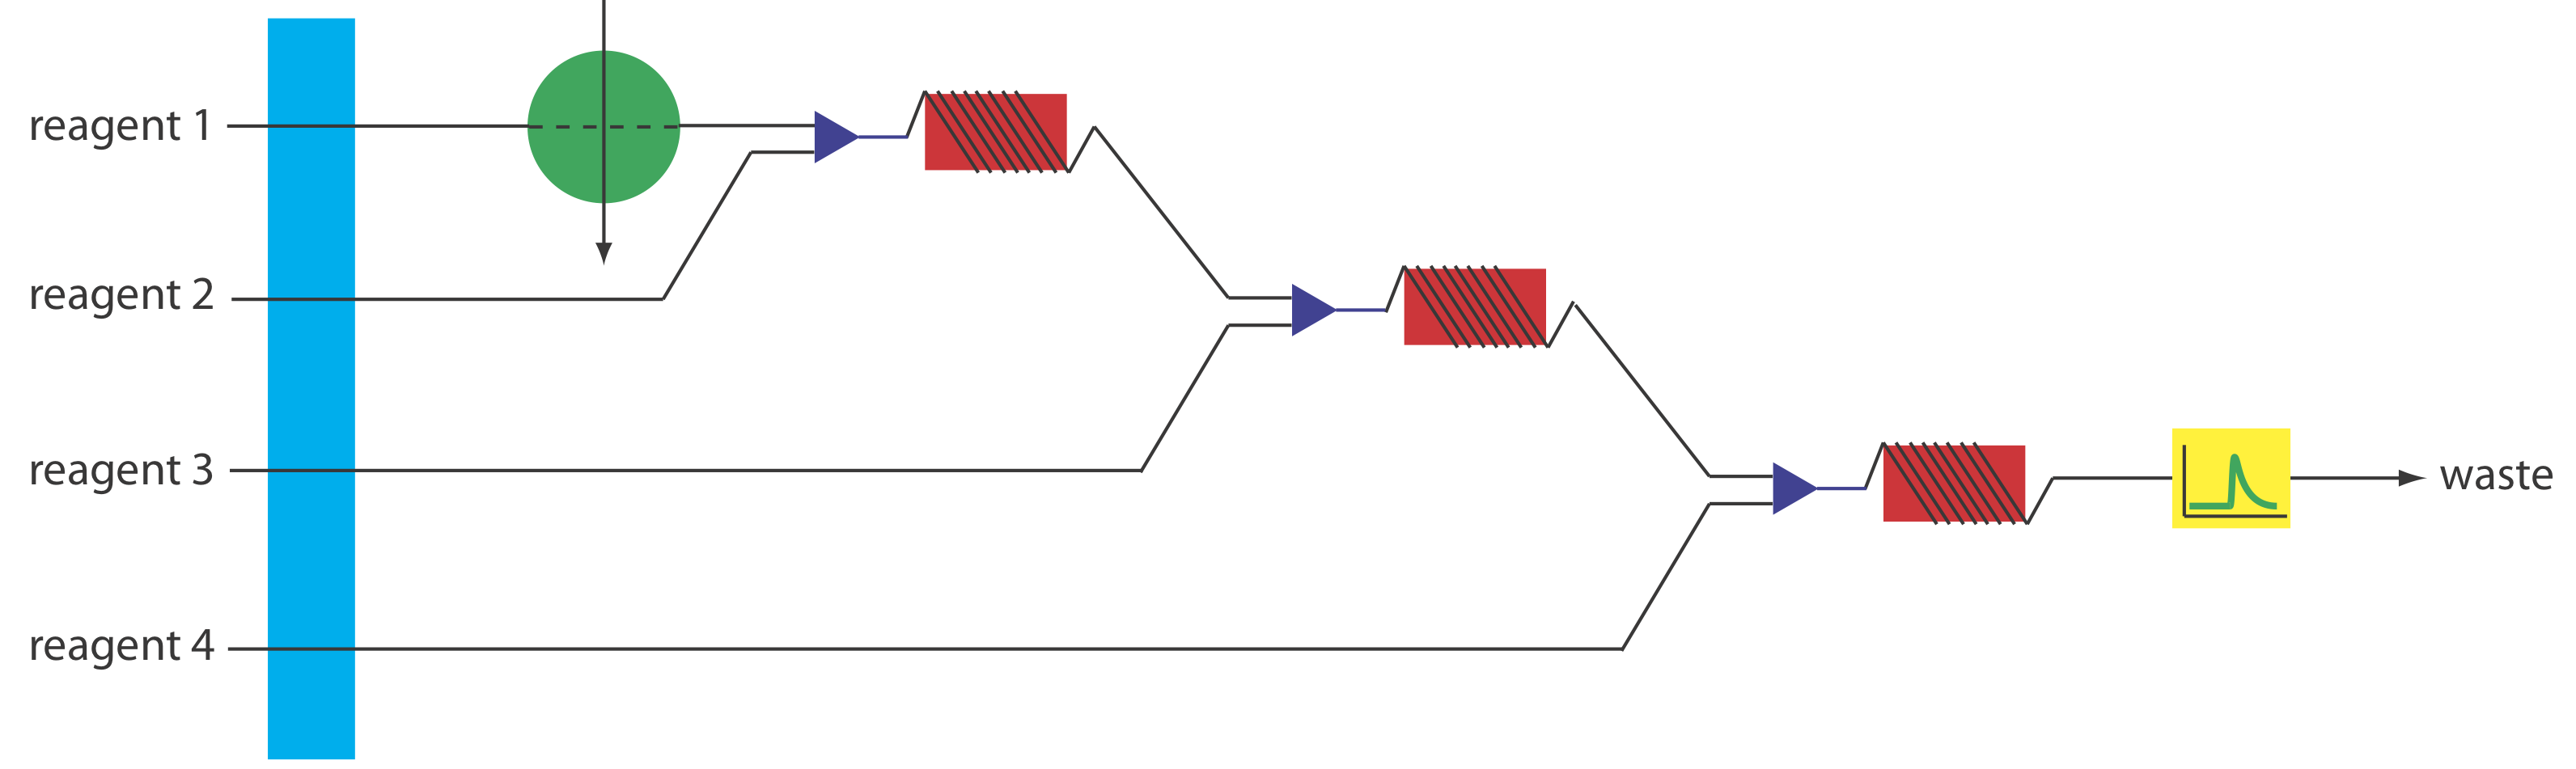 Reagent 1 flows through a loop injector and meets the other three reagents with three channel junctions, each followed by a mixing/reacting coil, then passes through a detector and then to waste.